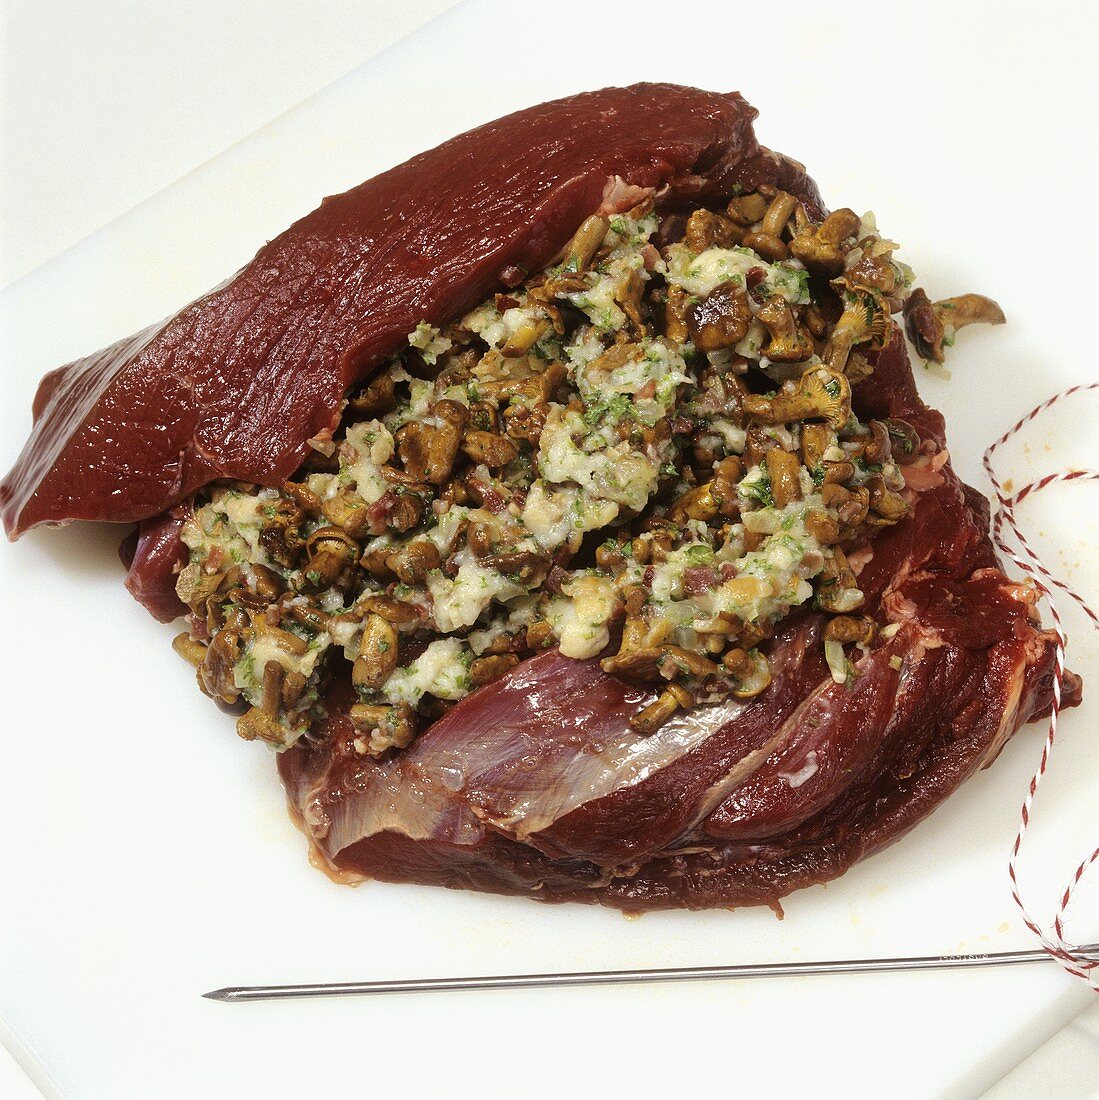 Preparing leg of venison 'Forester's style' (stuffing the meat)